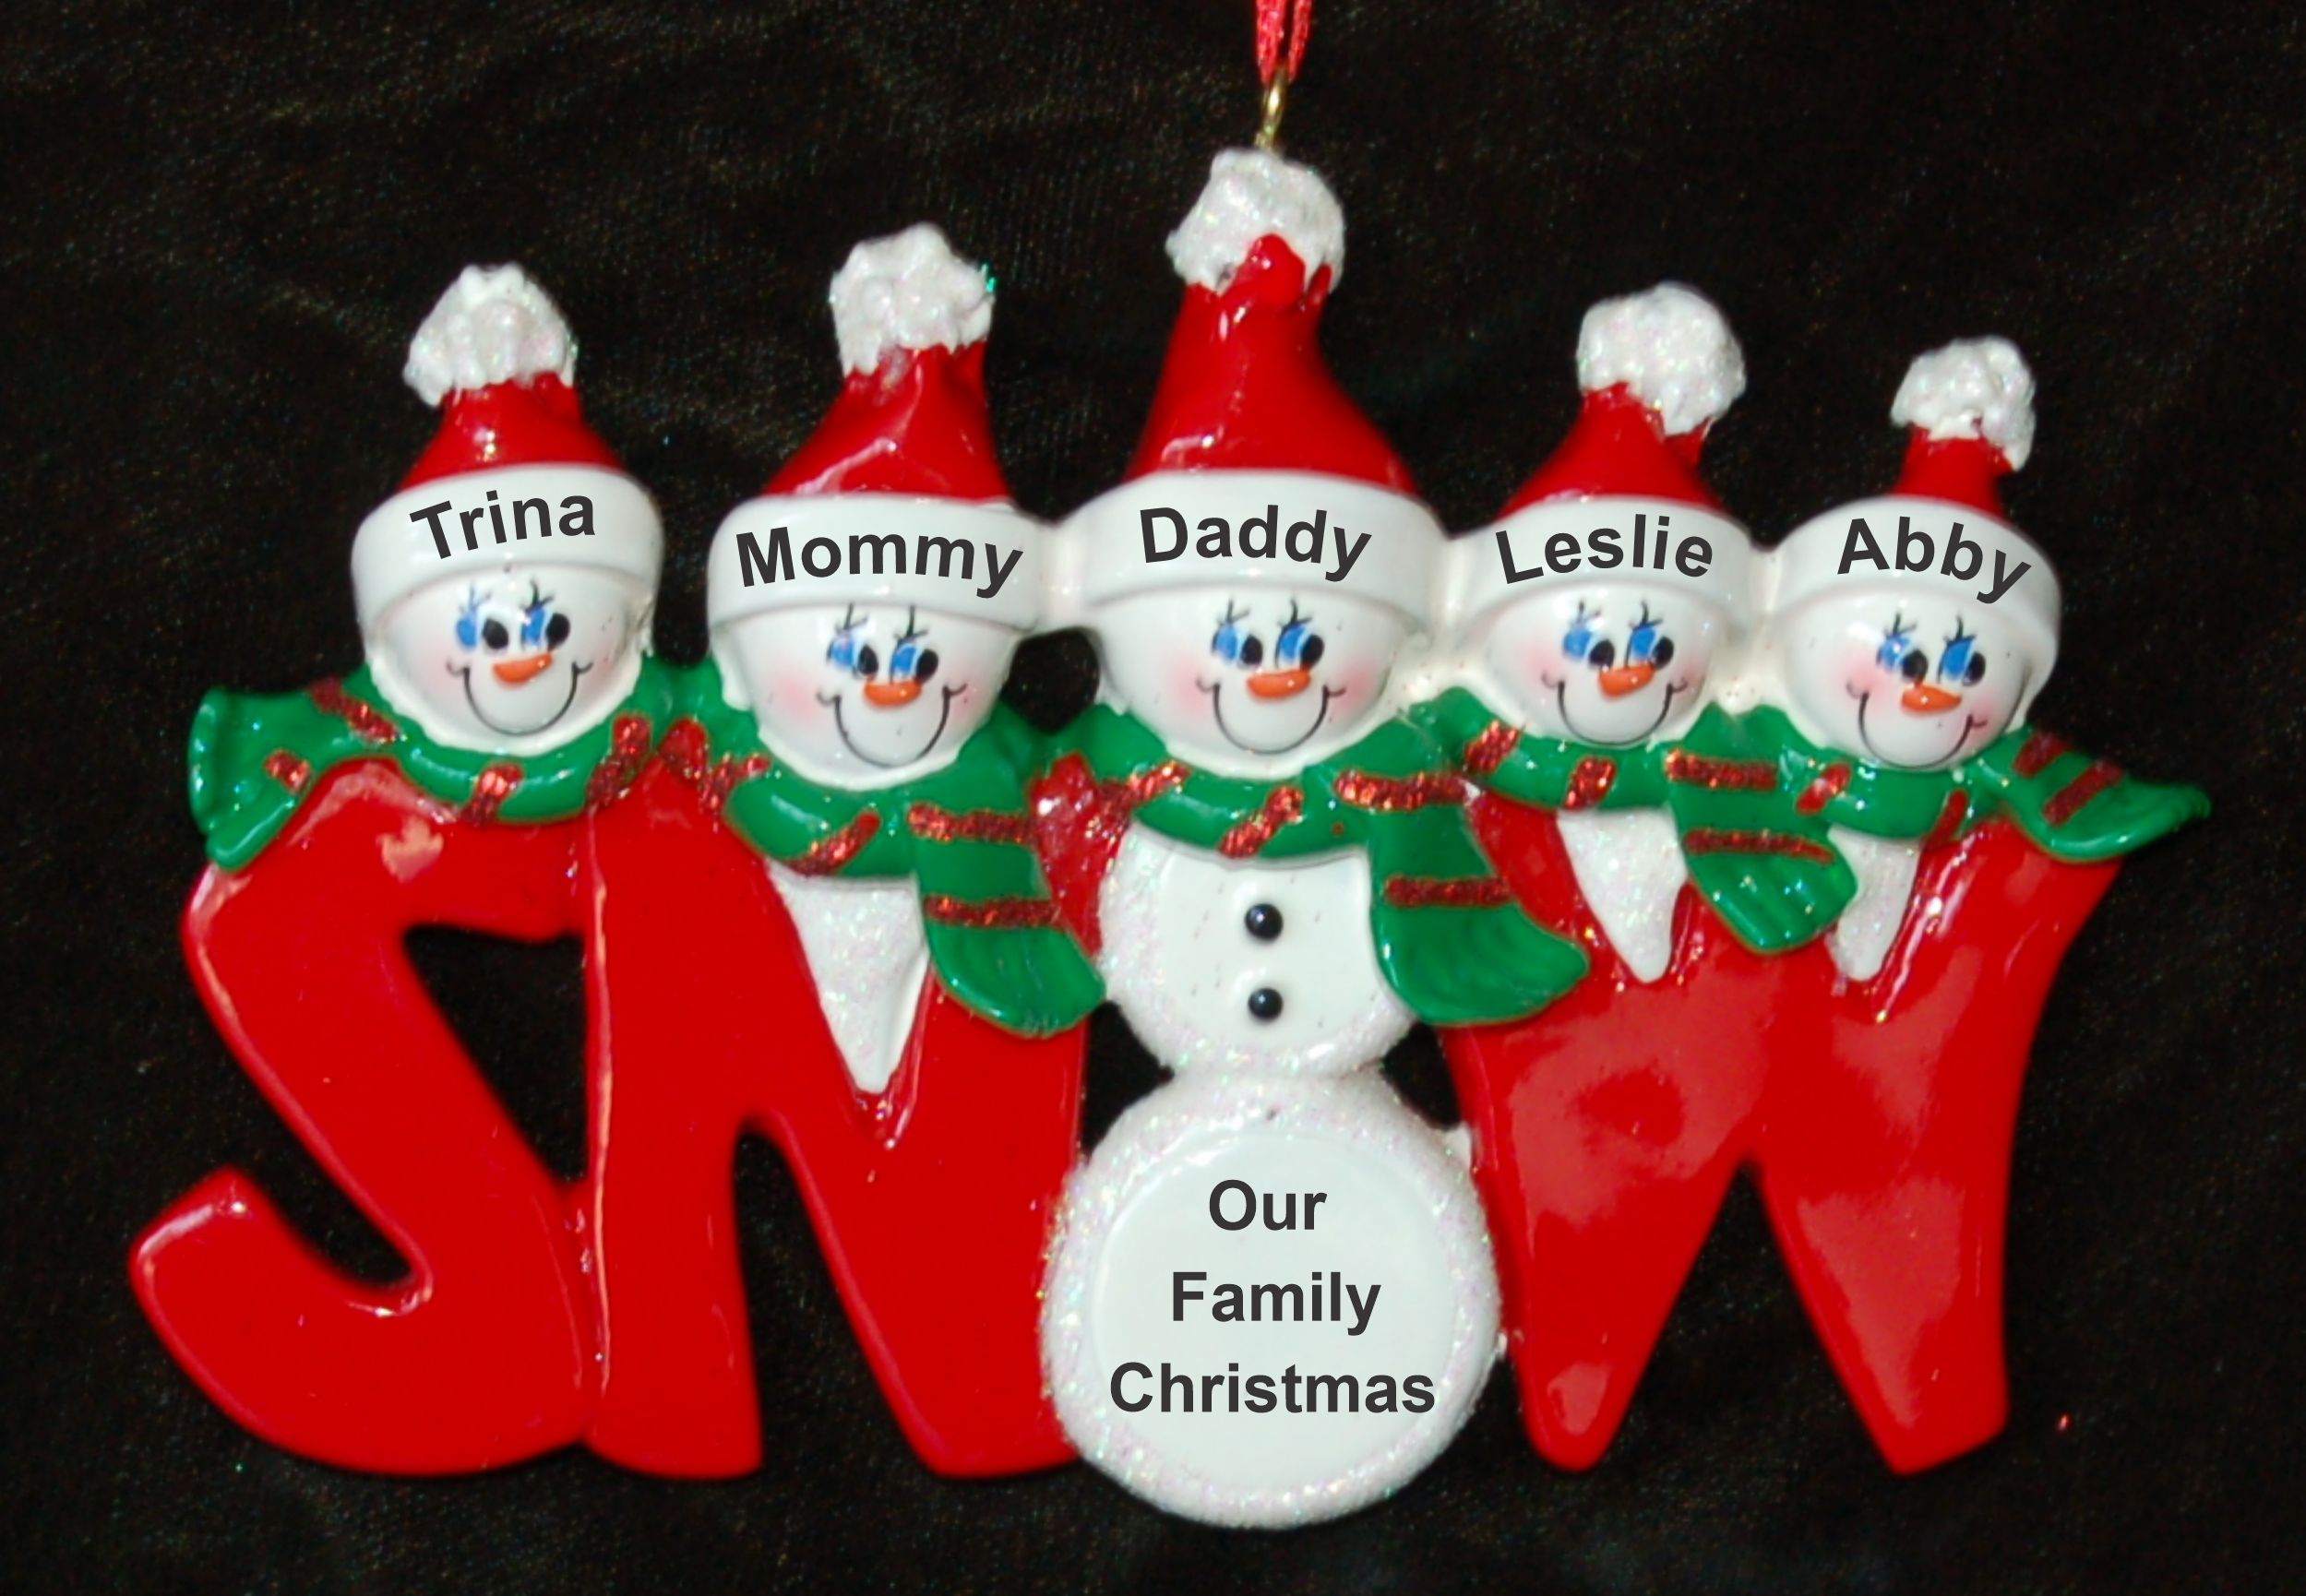 Family Christmas Ornament Snow Much Fun for 5 Personalized by RussellRhodes.com